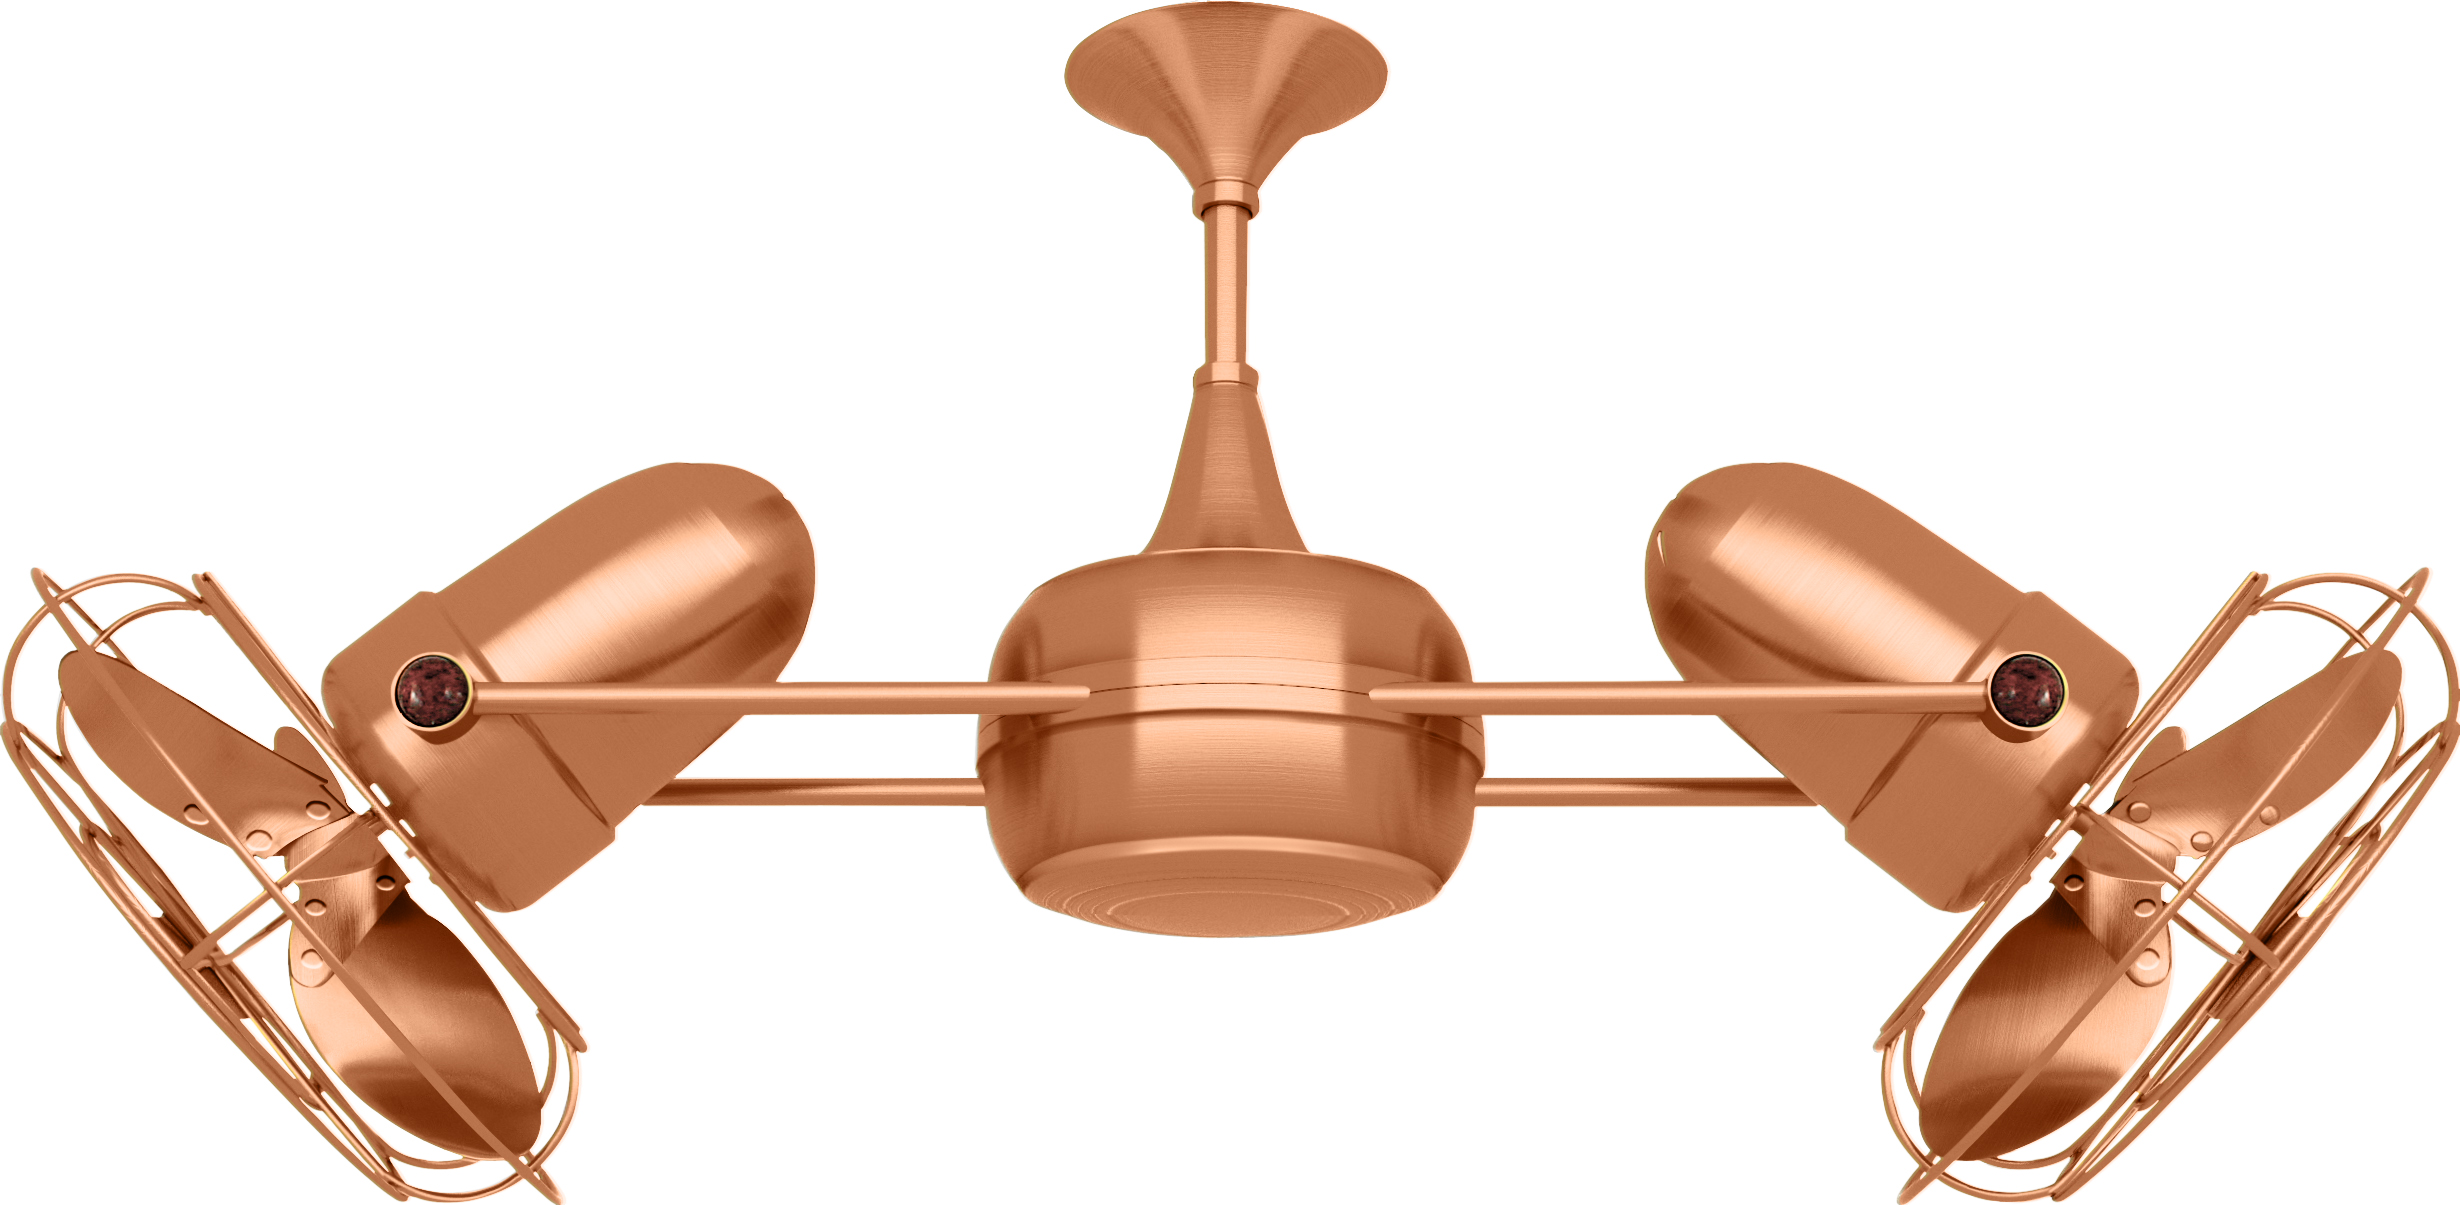 Duplo Dinamico rotational dual head ceiling fan in Brushed Nickel finish with Metal blades made by Matthews Fan Company.